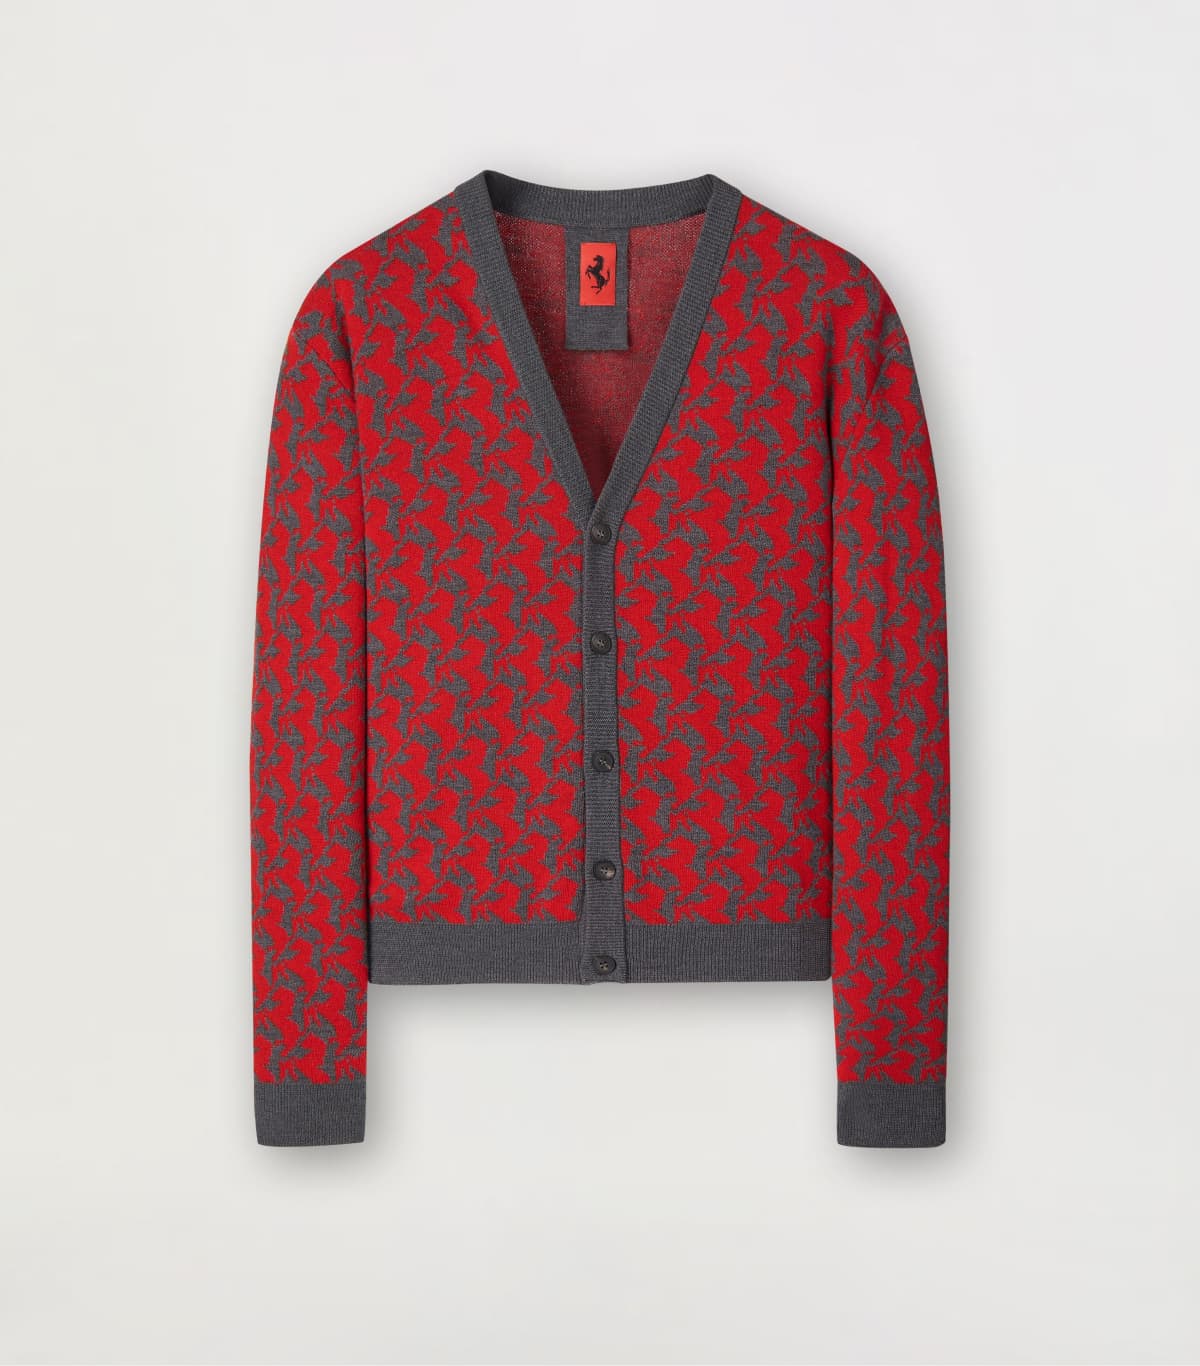 Two-tone cardigan with Prancing Horse motif